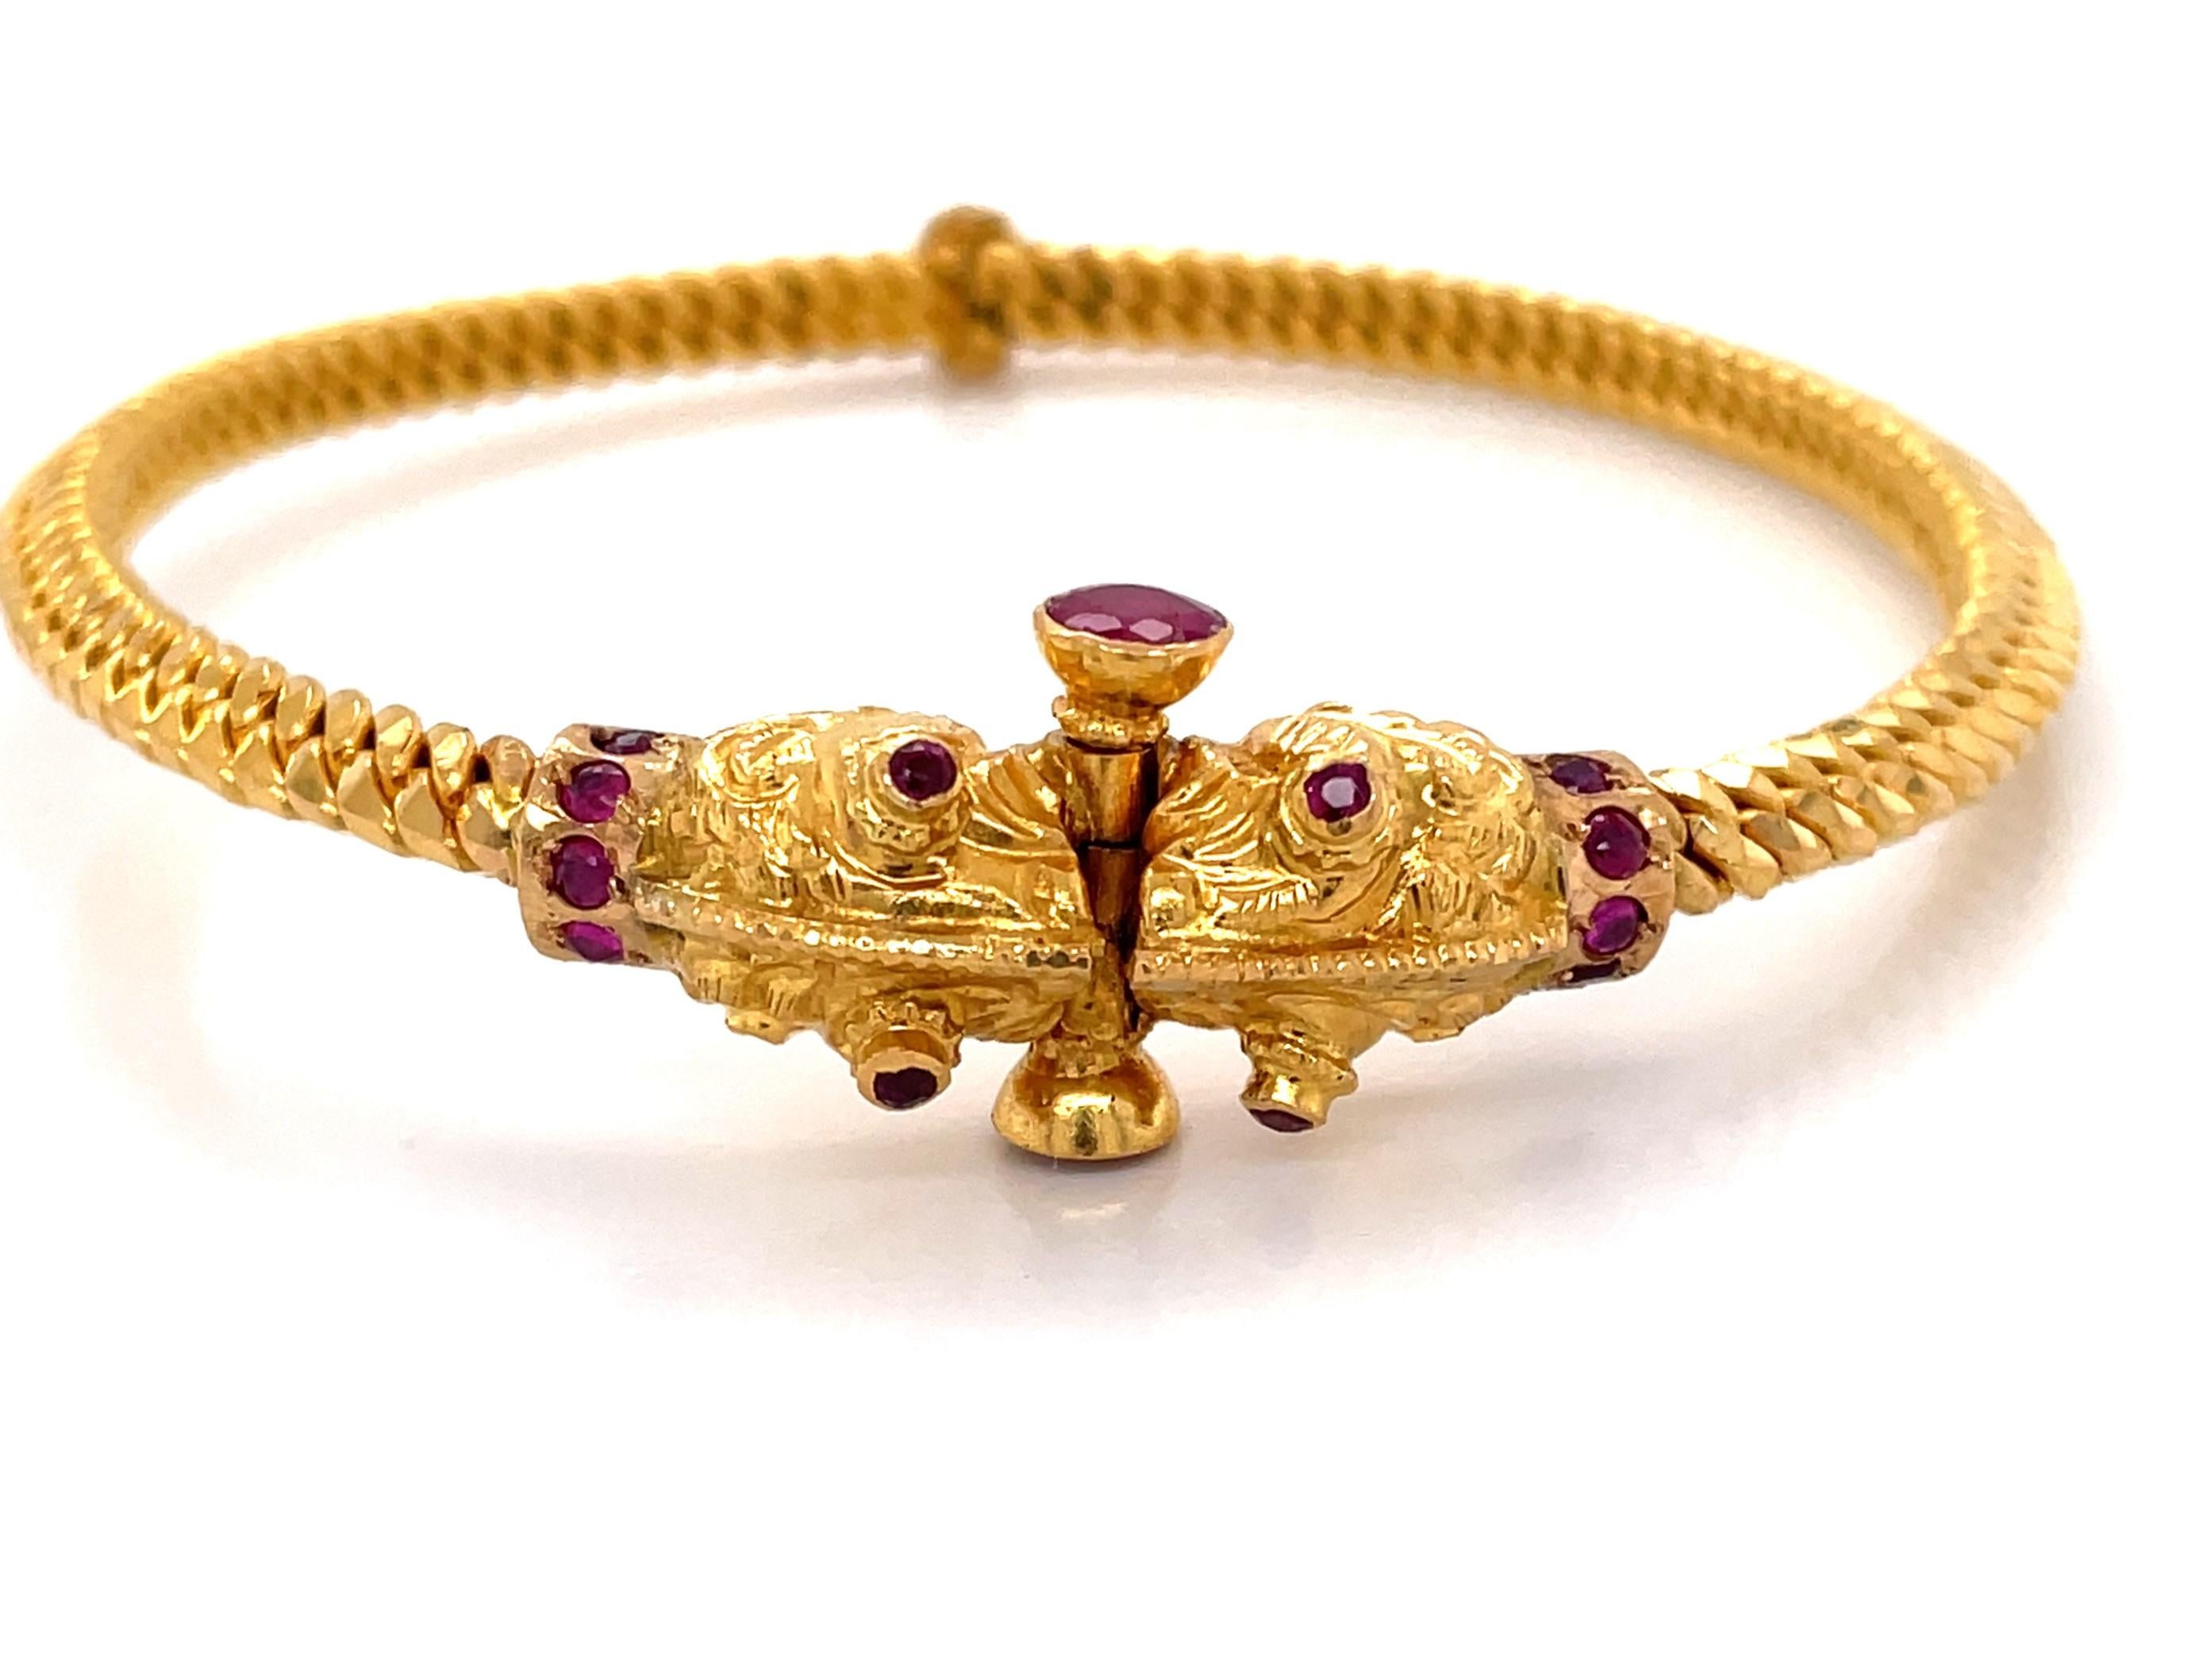 Unusual and artisan-made, this twenty two karat (22K) yellow gold bangle bracelet is alluring with mystical serpent heads that meet and are adorned with .54 carats of hand cut  natural rubies. Crafted with intricate screw closure, this artful 2-1/2